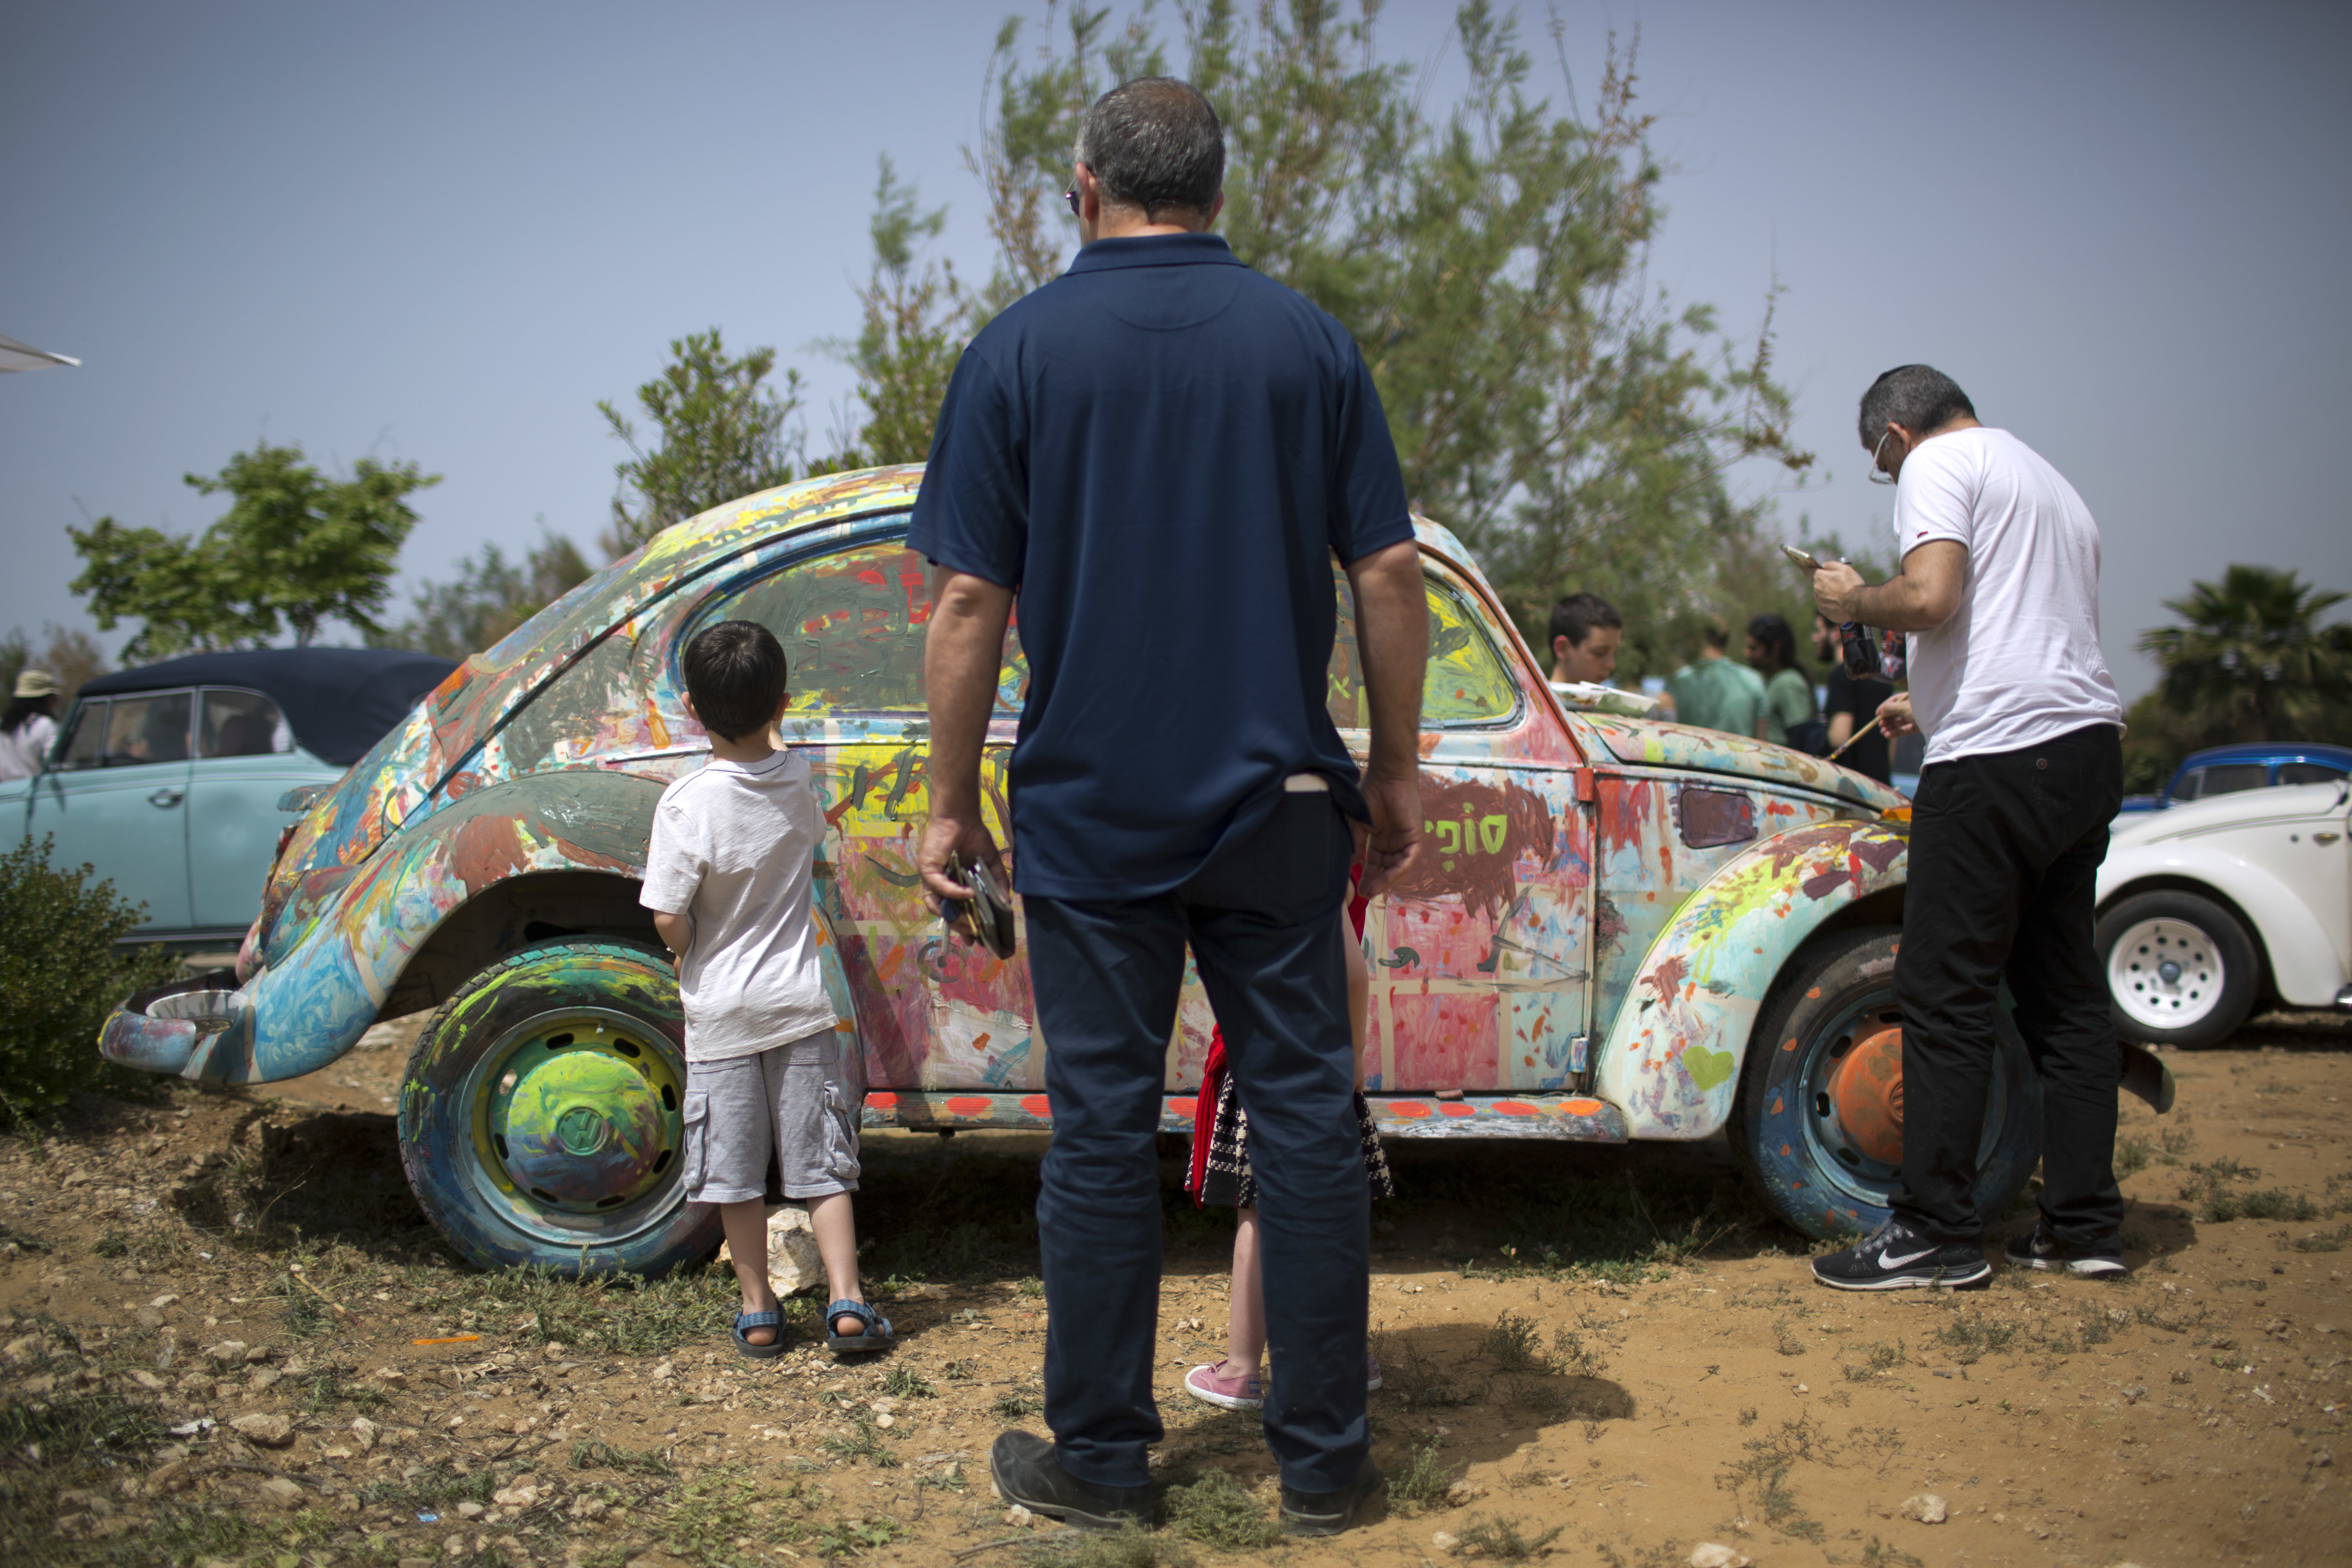 People paints an old Volkswagen Beetle during the annual gathering of the 